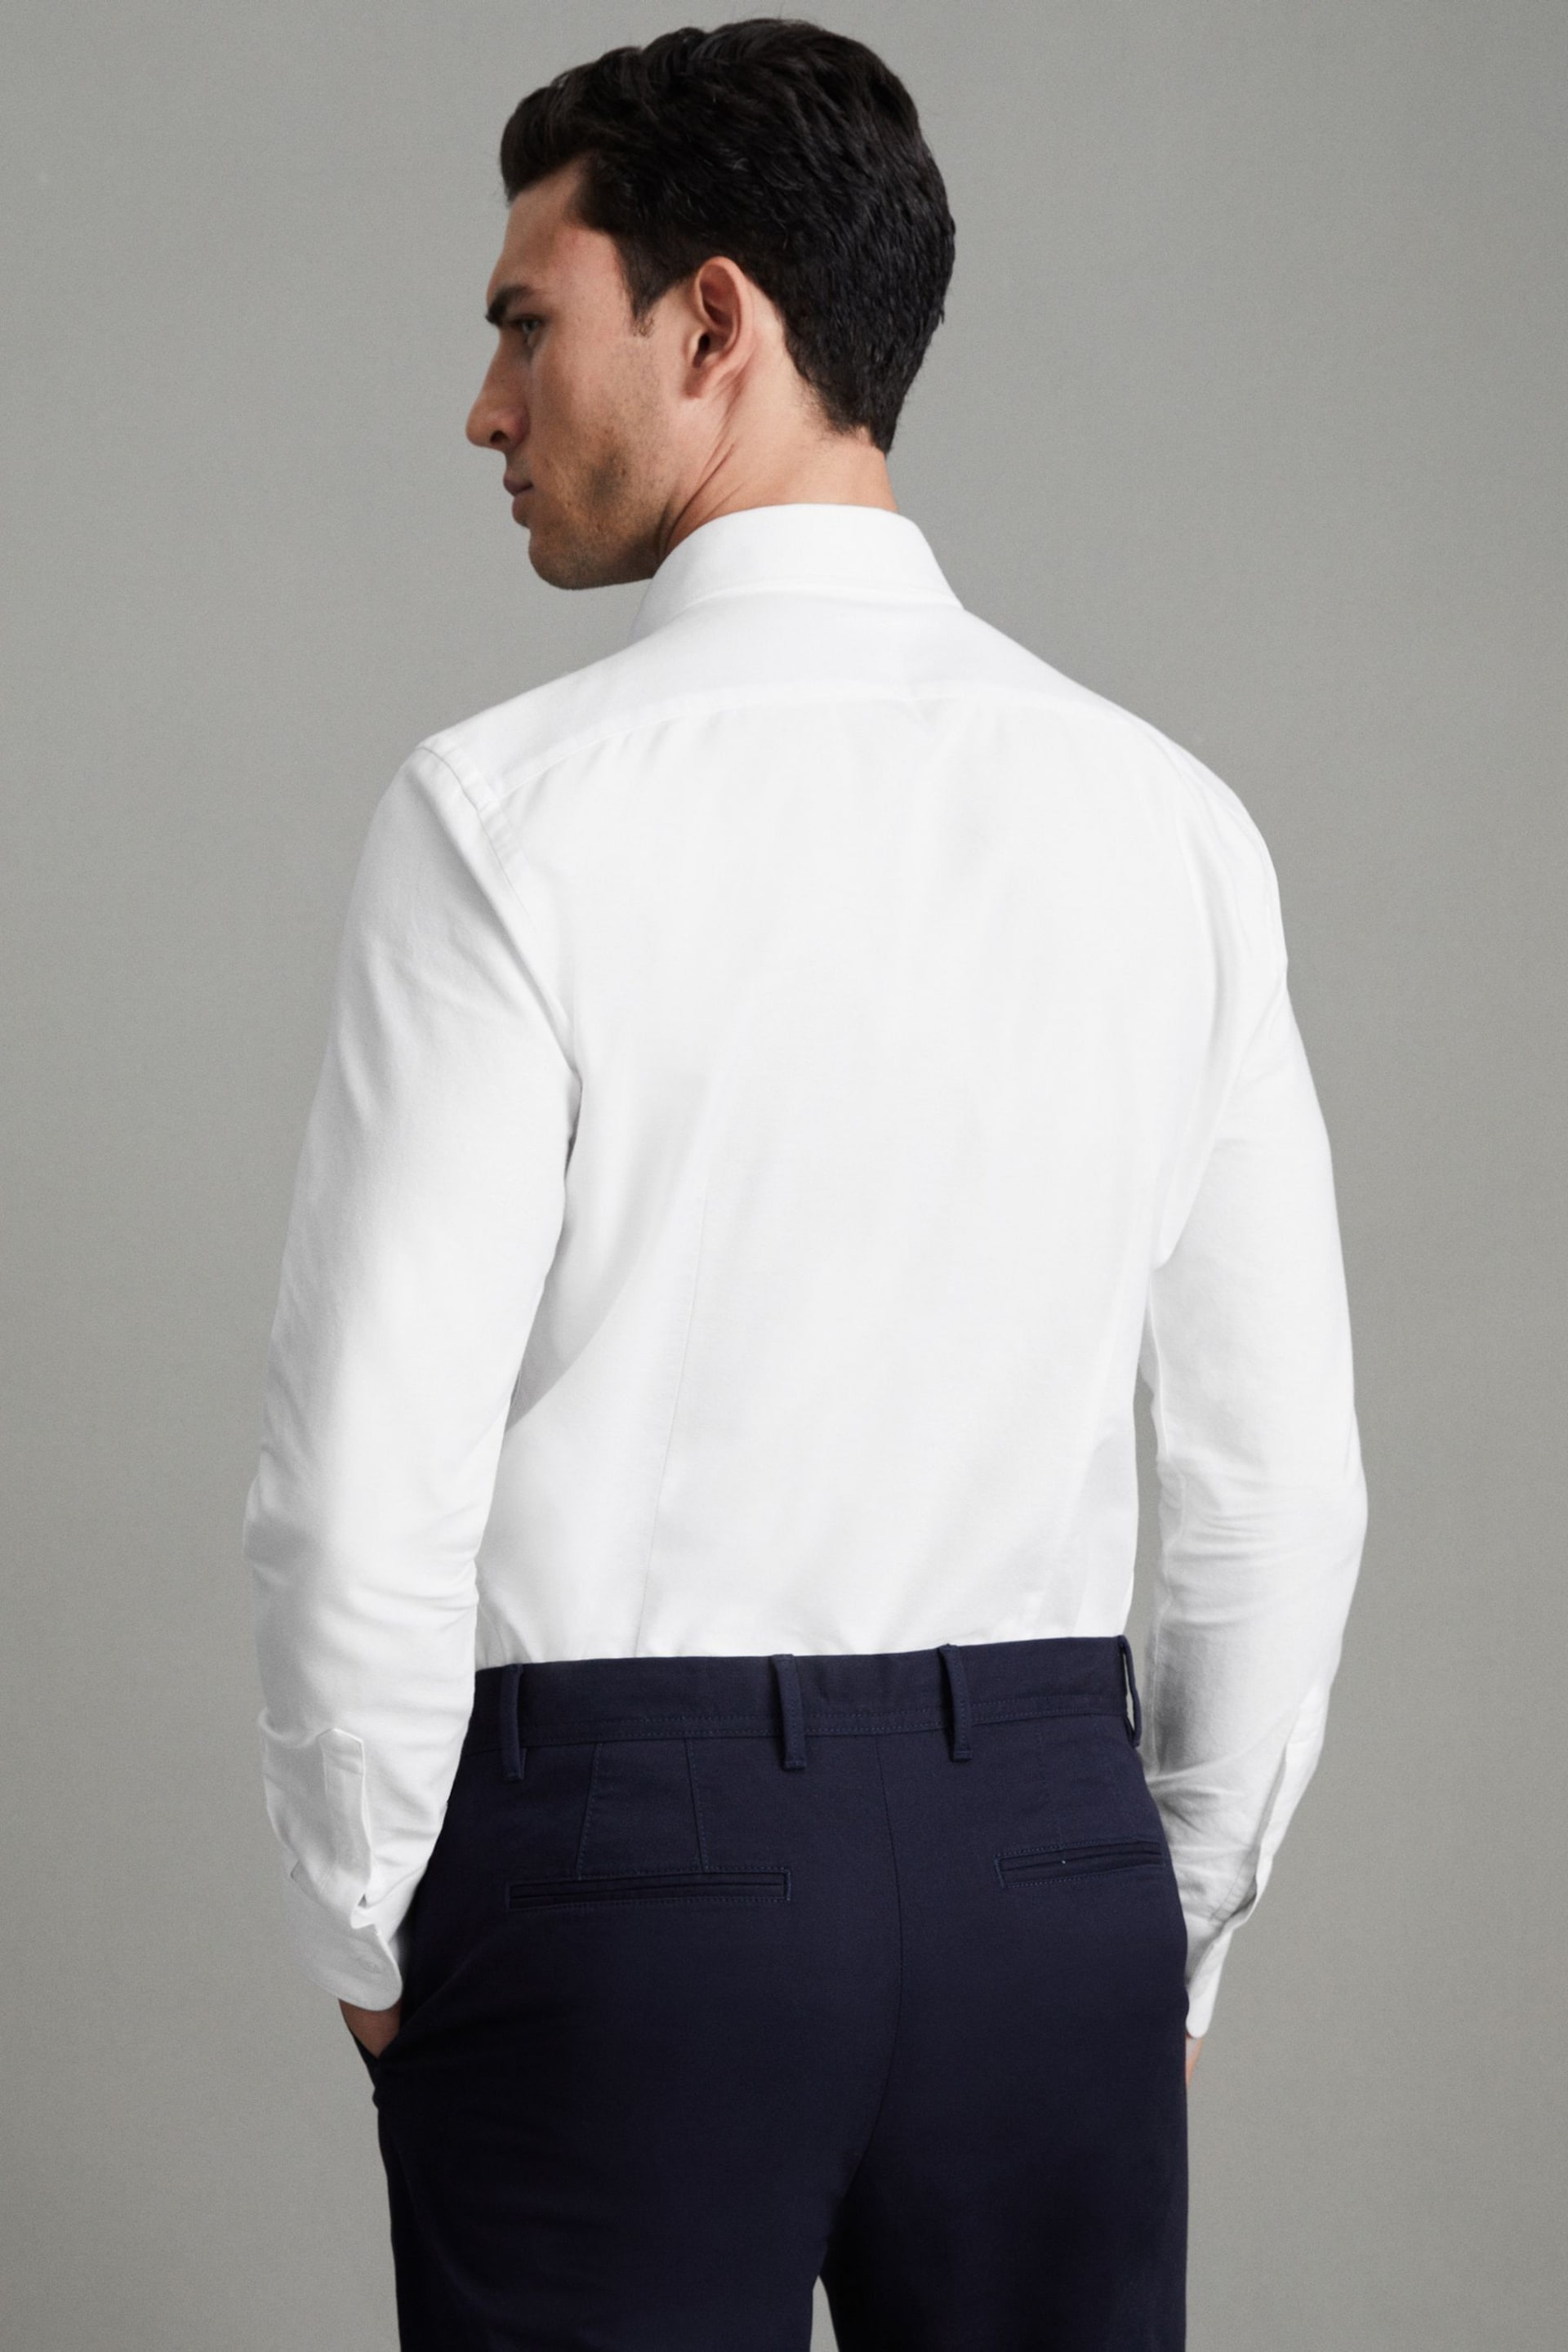 Reiss White Greenwich Slim Fit Cotton Oxford Shirt - Image 4 of 6